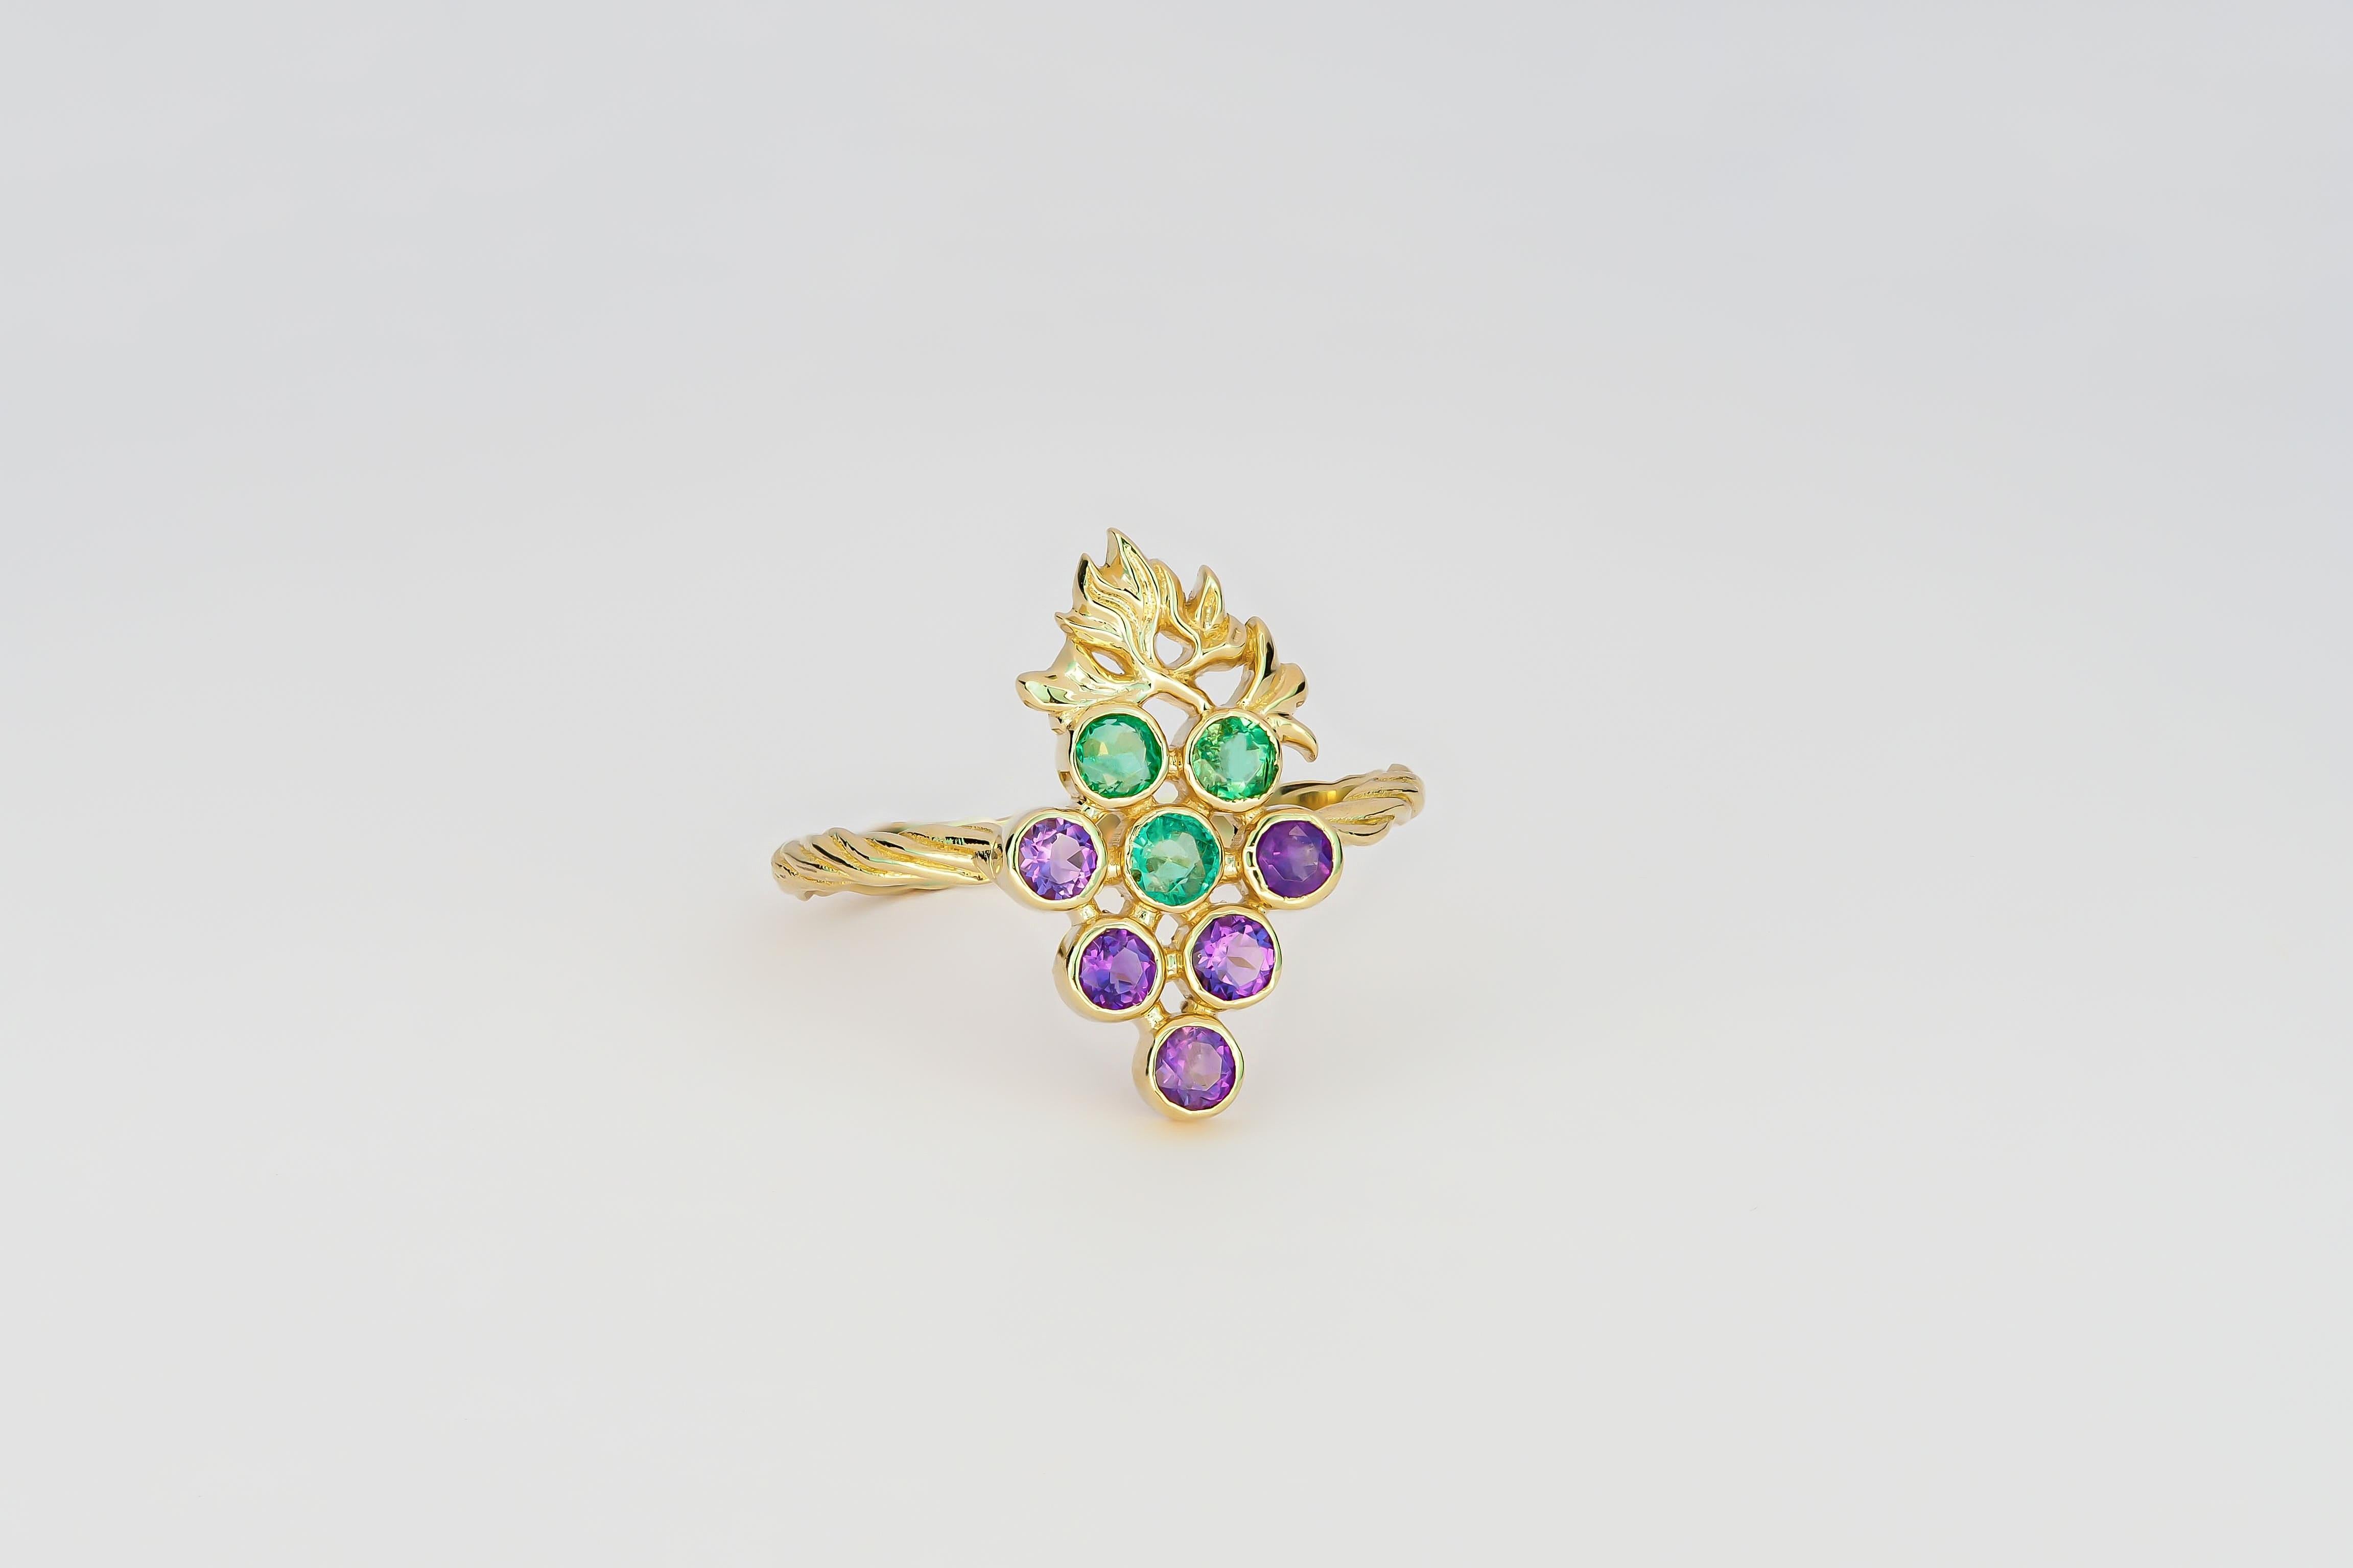 Emerald and amethyst grape 14k gold ring. 
Vine Leaves Ring. Gold fertility ring. Summer vine ring. Plant gold ring. Grape gold ring.

Metal: 14k gold
Weight: 1.95 g. depends from size

Emeralds: 3 pieces, color - green
Round cut, 0.33 ct. approx (3